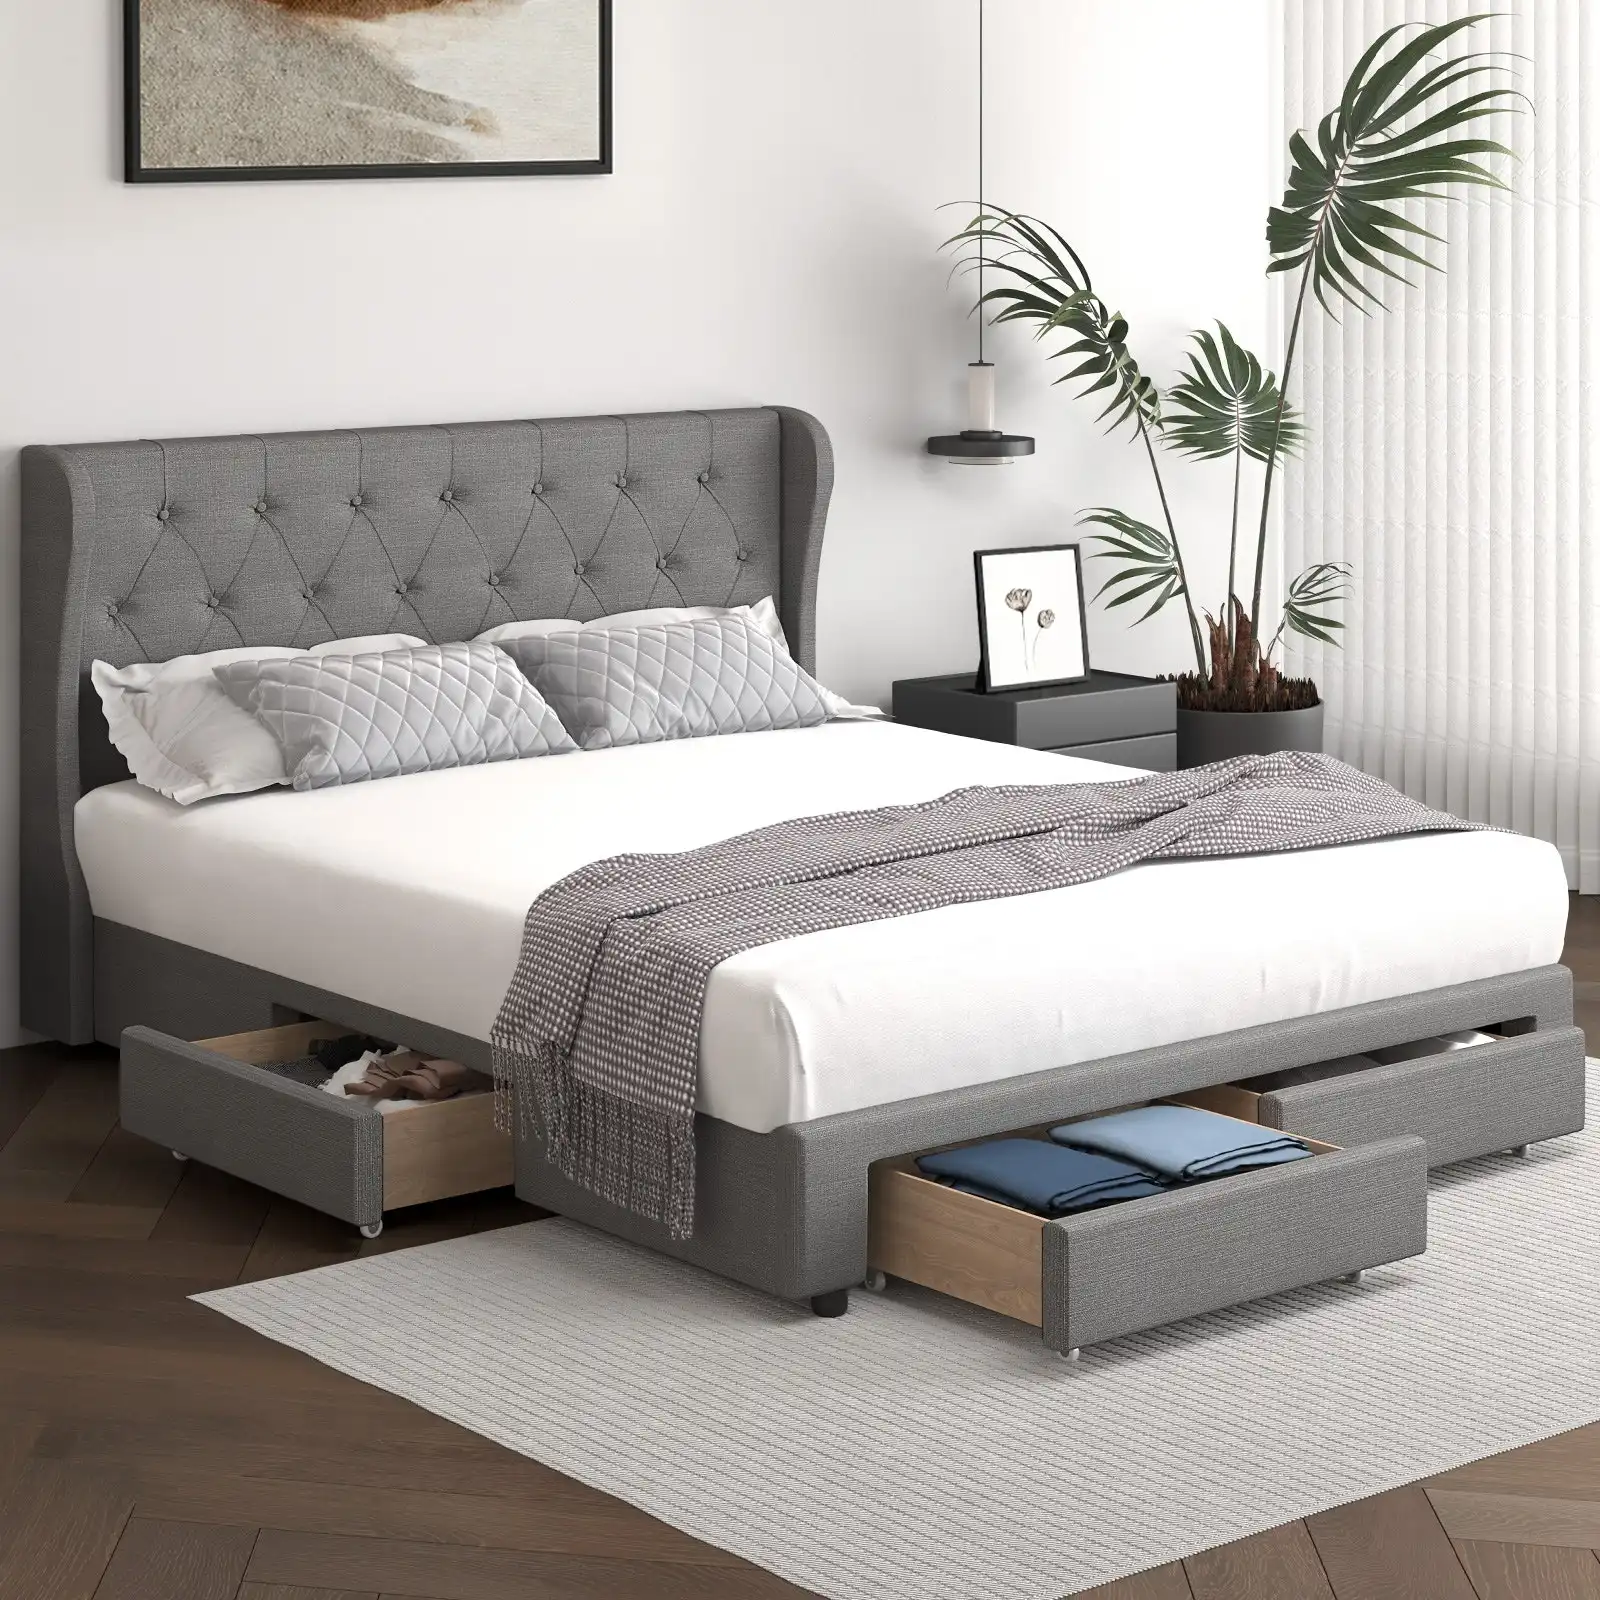 Oikiture Bed Frame Queen Size Base With 4 Storage Drawers